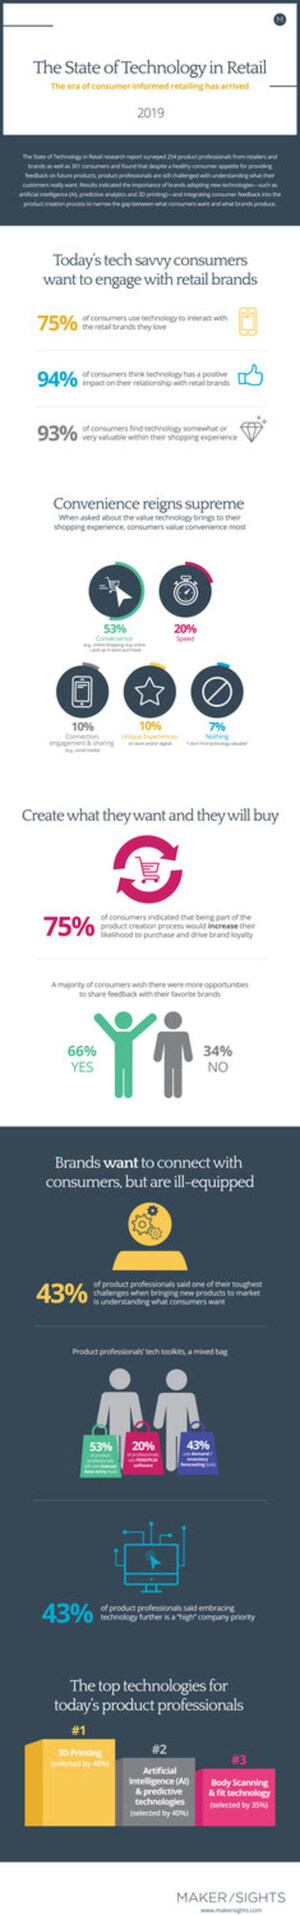 Create What They Want and They Will Come: Survey Reveals the Role Consumers Expect to Have in the Product Creation Process, Highlights Need for Consumer-Informed Retail Strategies